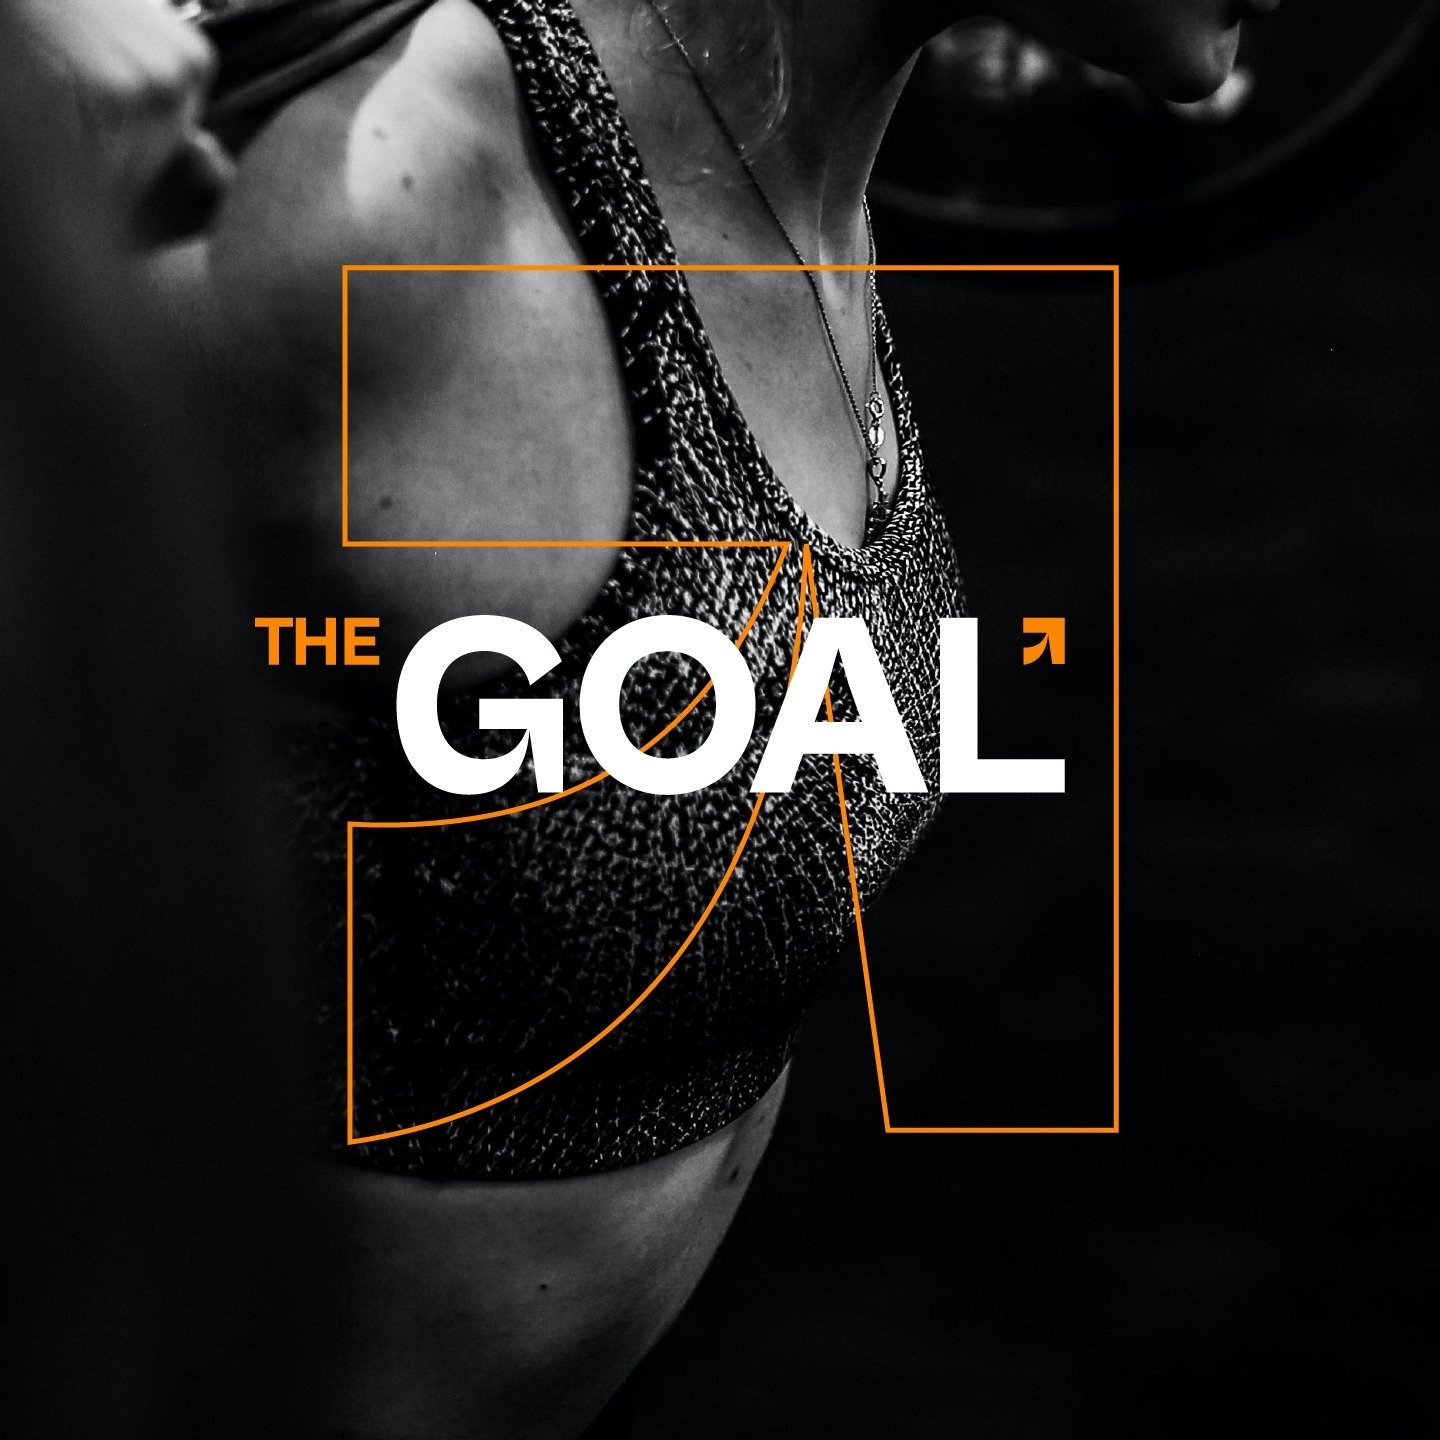 The Goal, a training studio dedicated to enhancing motor literacy, fostering improved health, physical condition, and individual performance.

The brand name was carefully chosen to embody values centred on tailoring and personalizing goals for each 